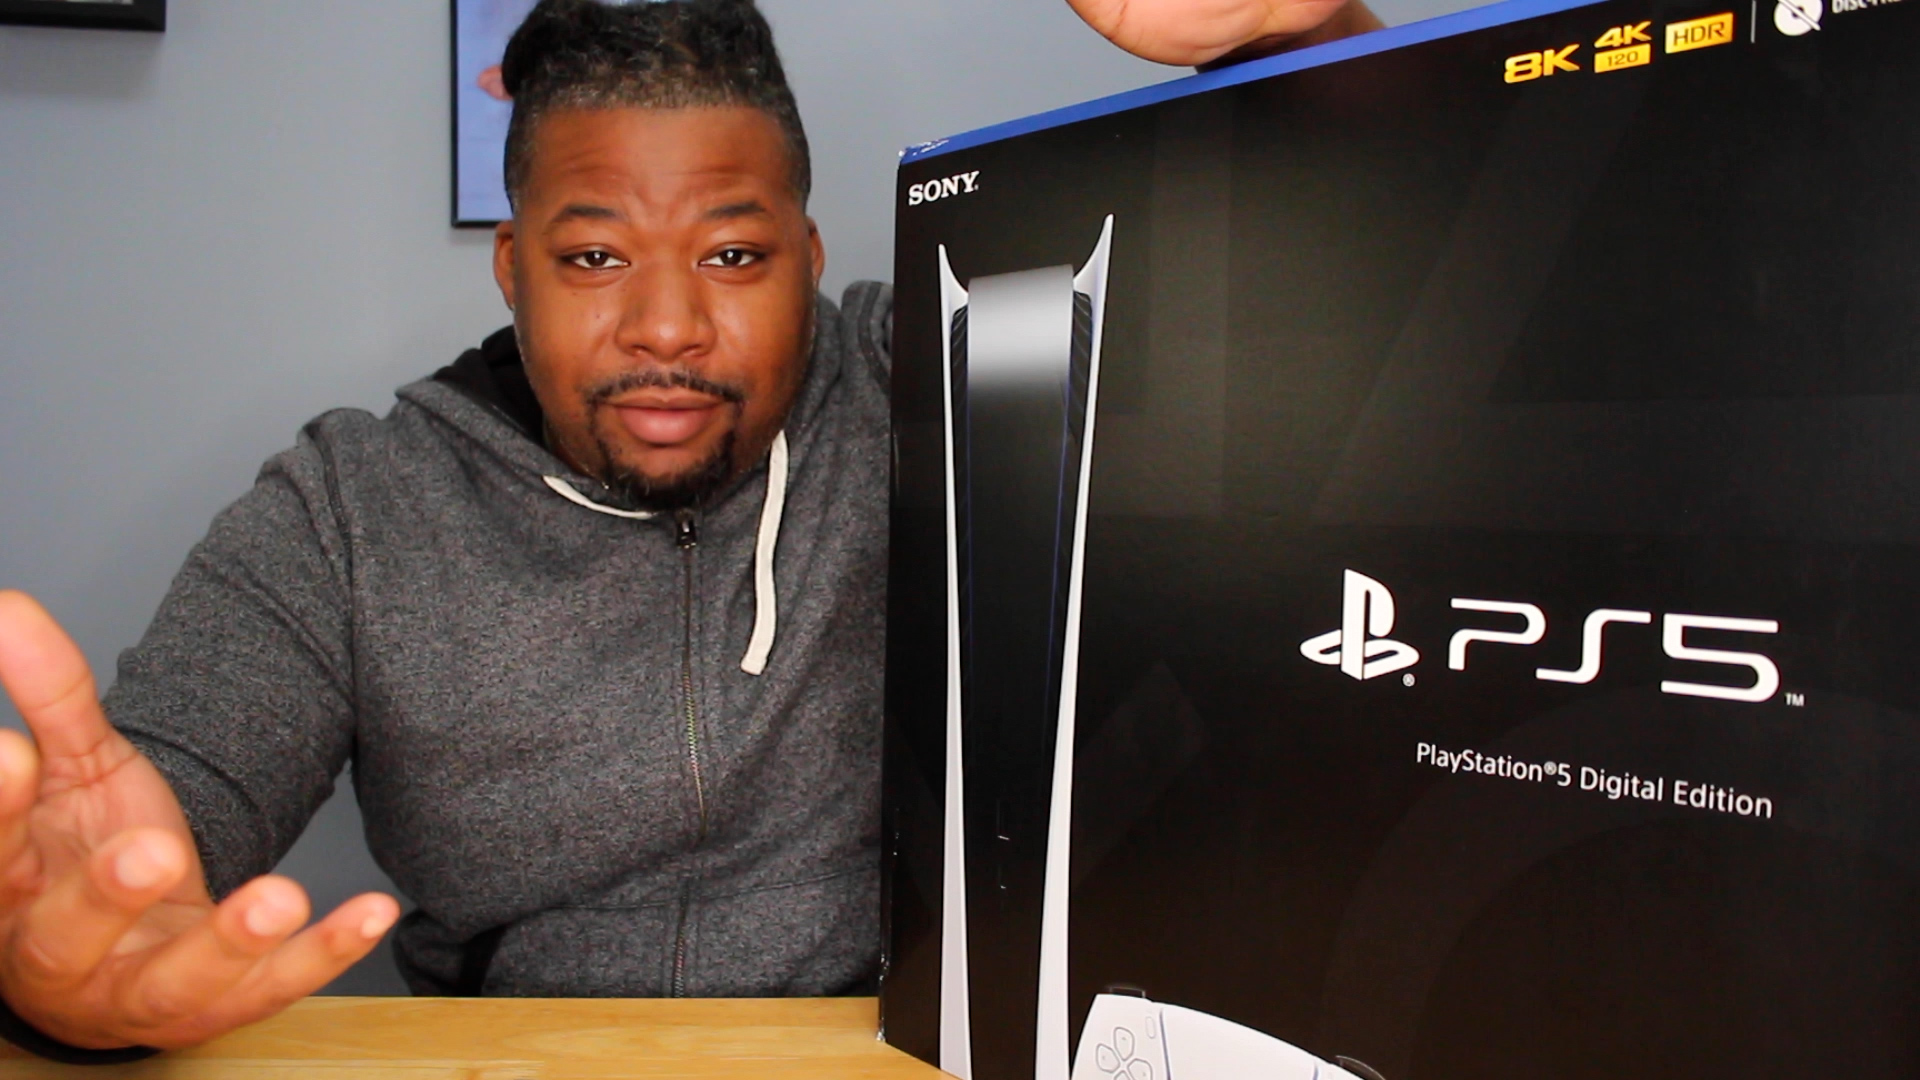 The first PS5 unboxing videos have been published